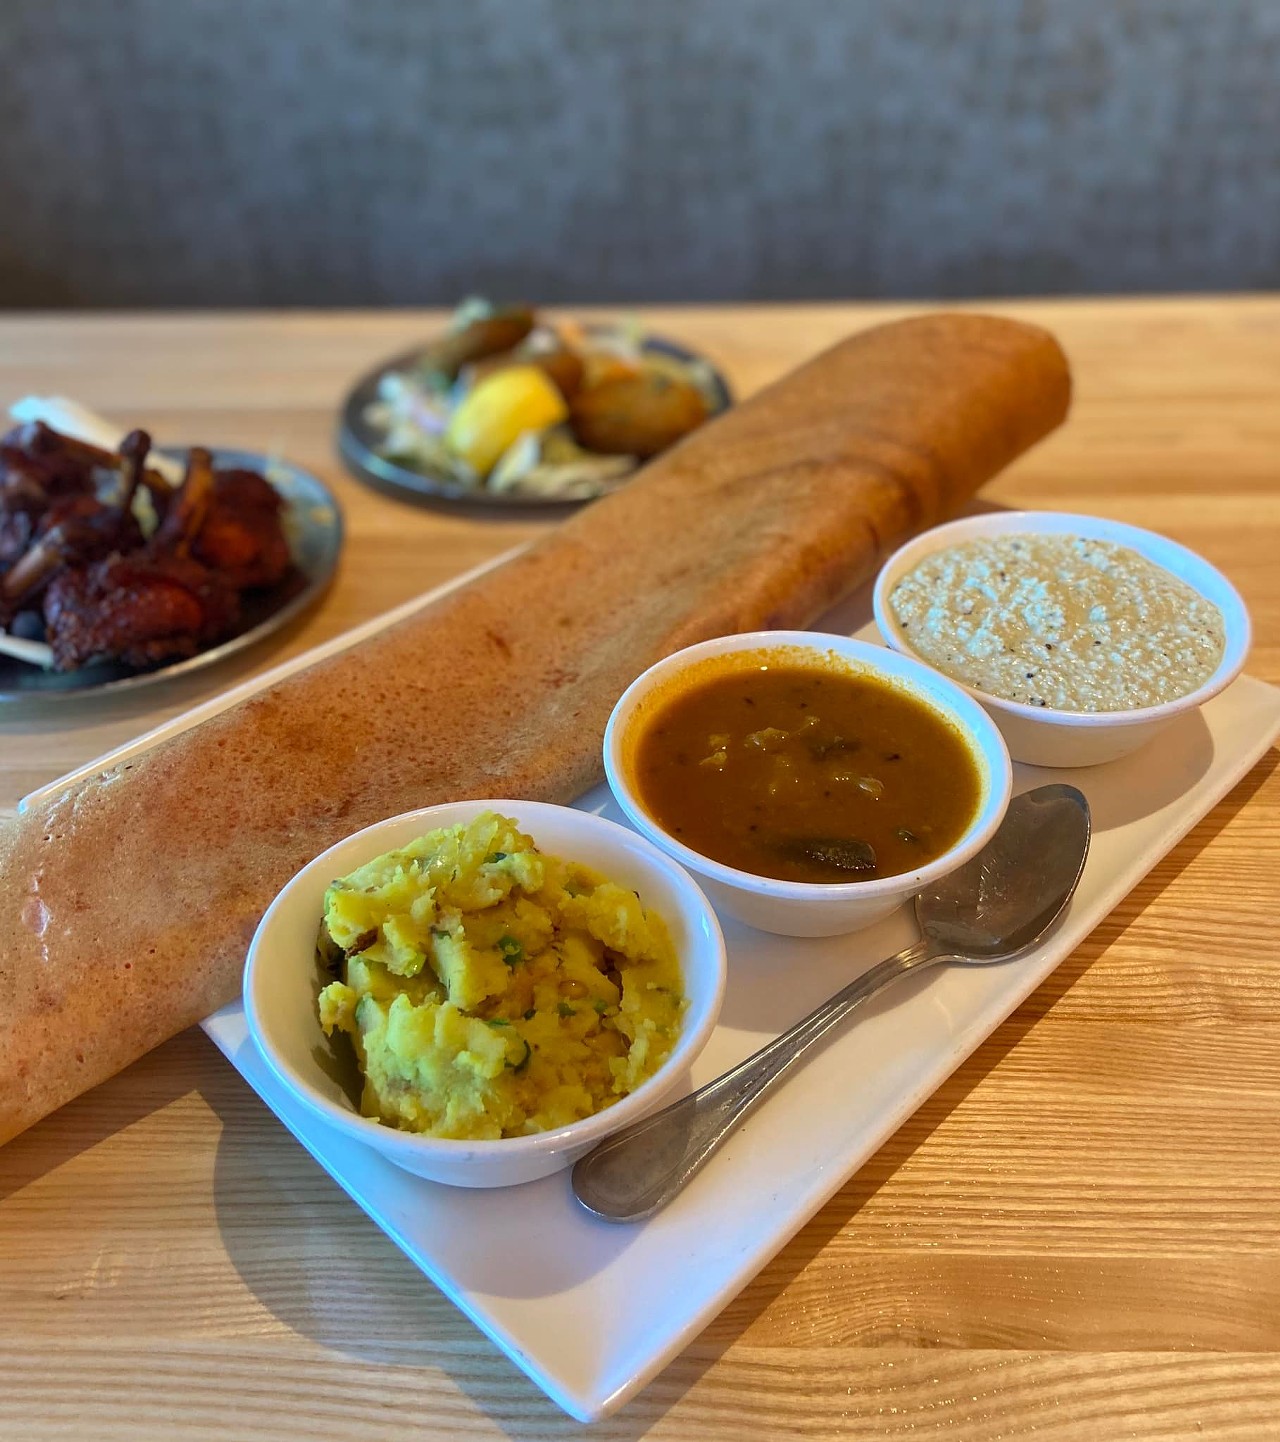 Tamarind Indian Cuisine 
501 Orlando Ave., Winter Park, 321-207-0760
"I ordered something MILD there once and it was so hot that no amount of yogurt helped me choke it down." – u/-HappyLady-
